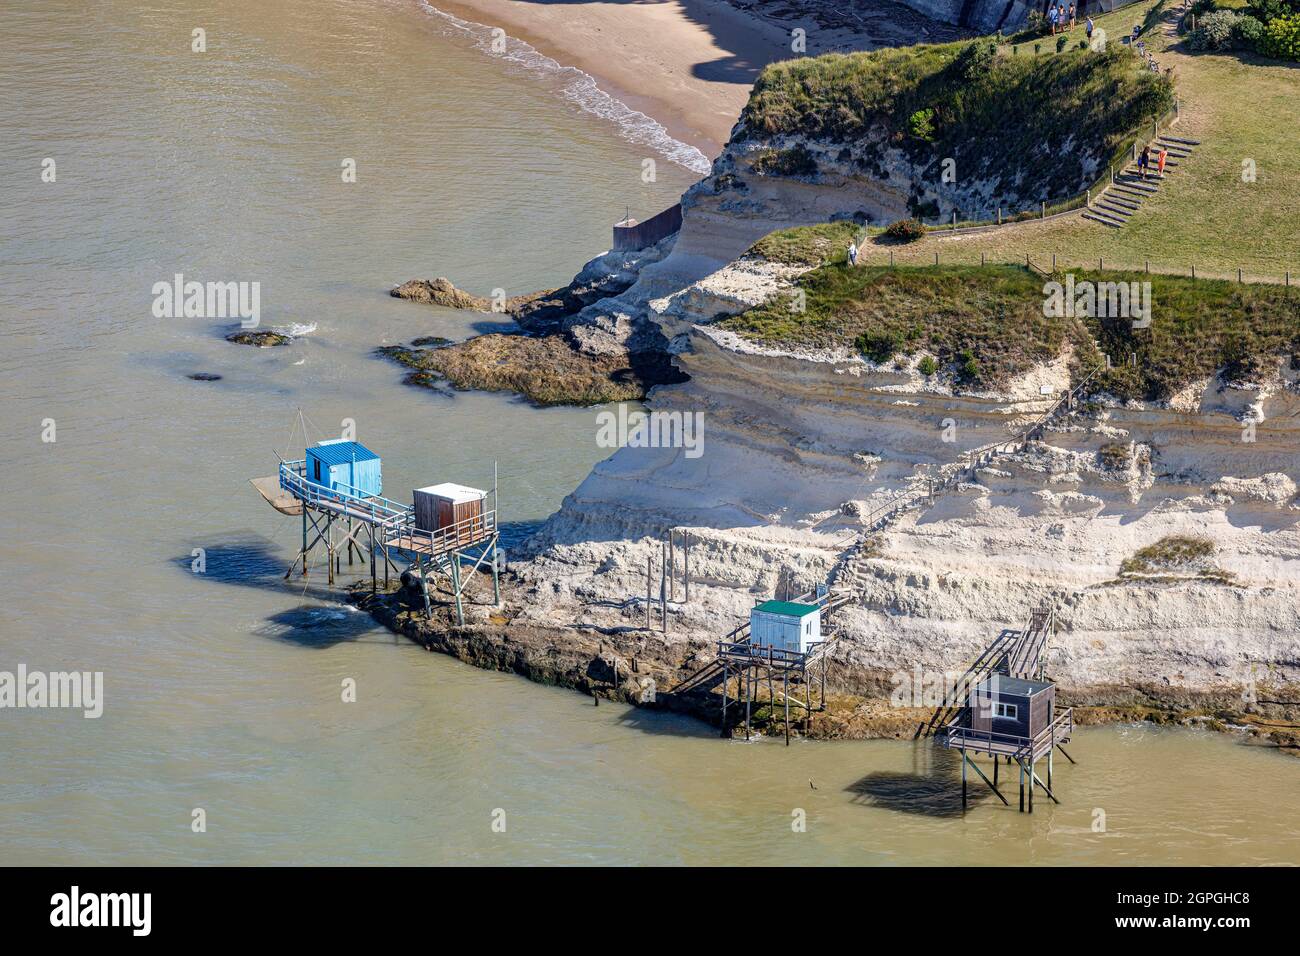 France, Charente Maritime, Meschers sur Gironde, fishery huts (aerial view) Stock Photo